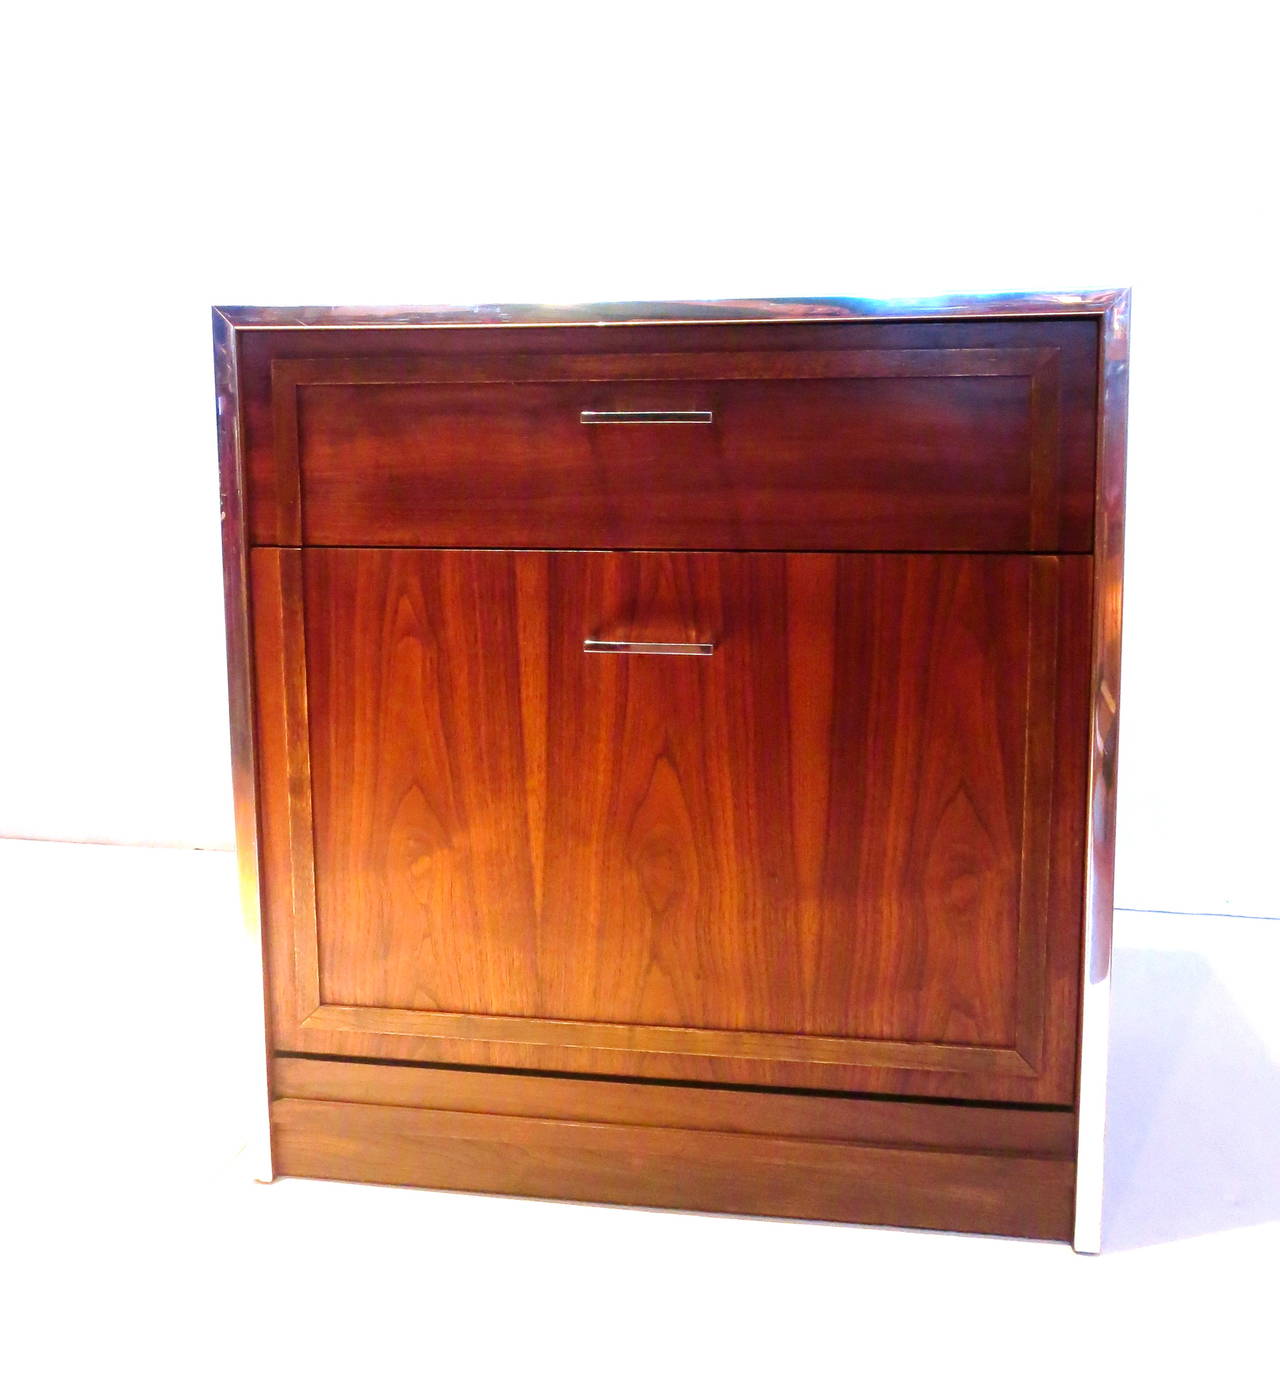 20th Century American Modern Walnut 1970s Small Record Cabinet with Chrome Detail